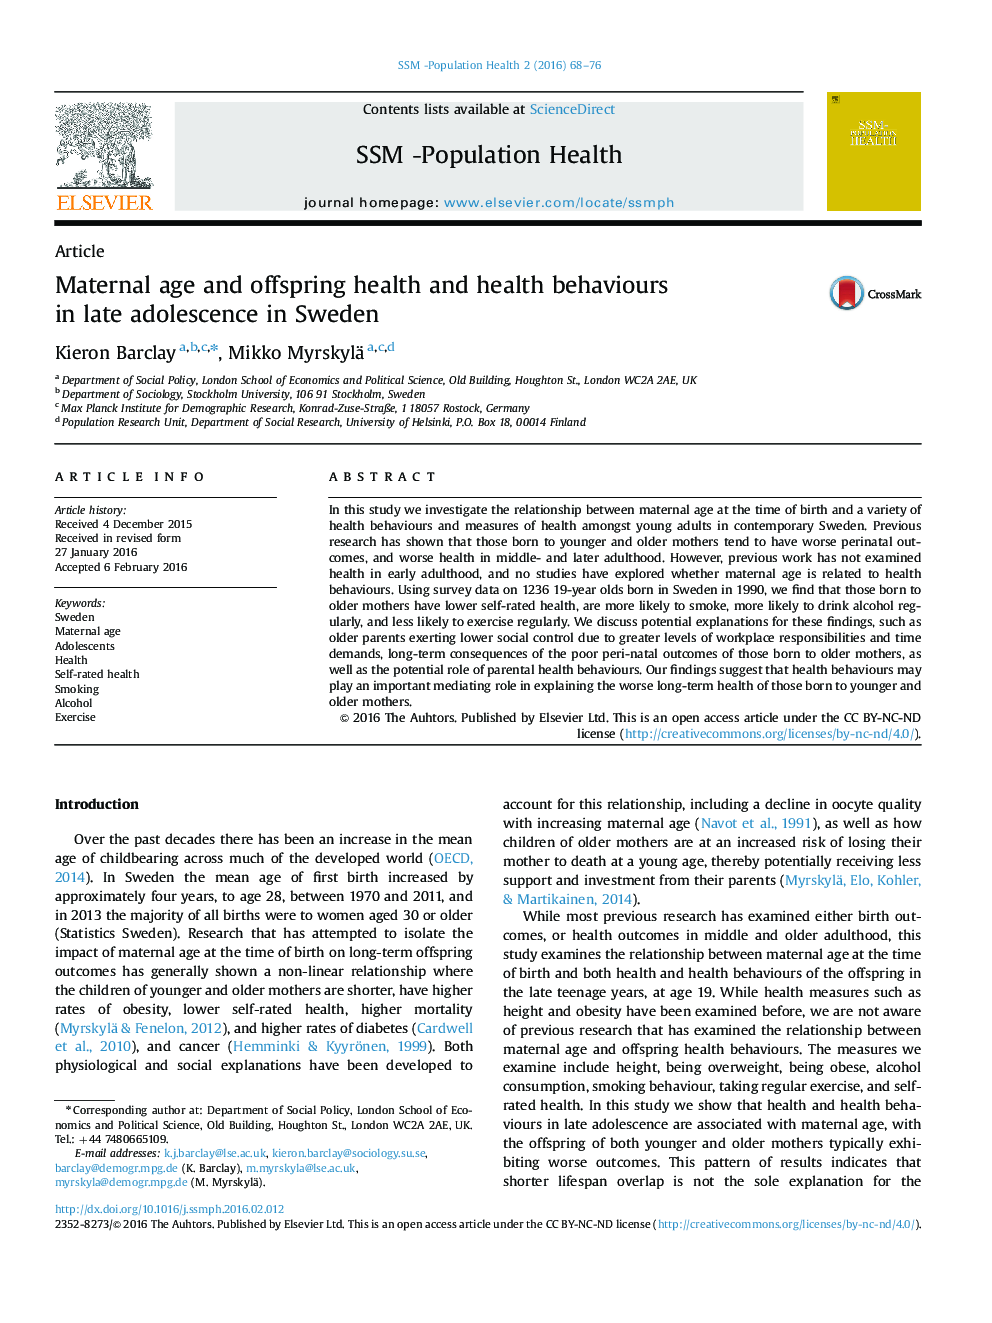 Maternal age and offspring health and health behaviours in late adolescence in Sweden